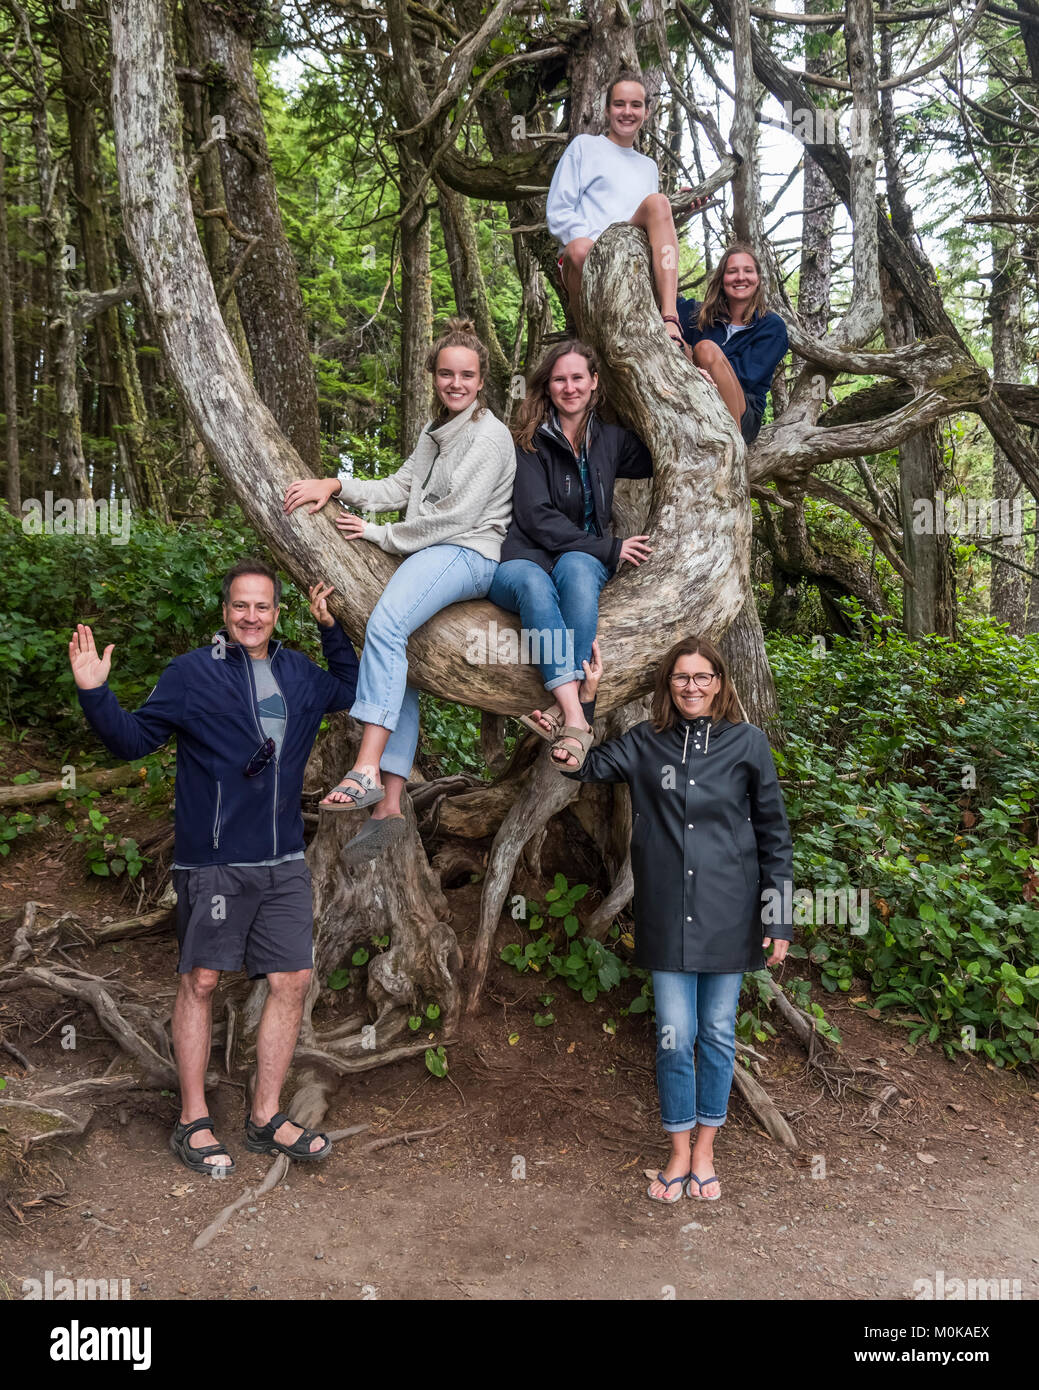 A family portrait with four daughters in a tree on Vancouver Island; Ucluelet, British Columbia, Canada Stock Photo